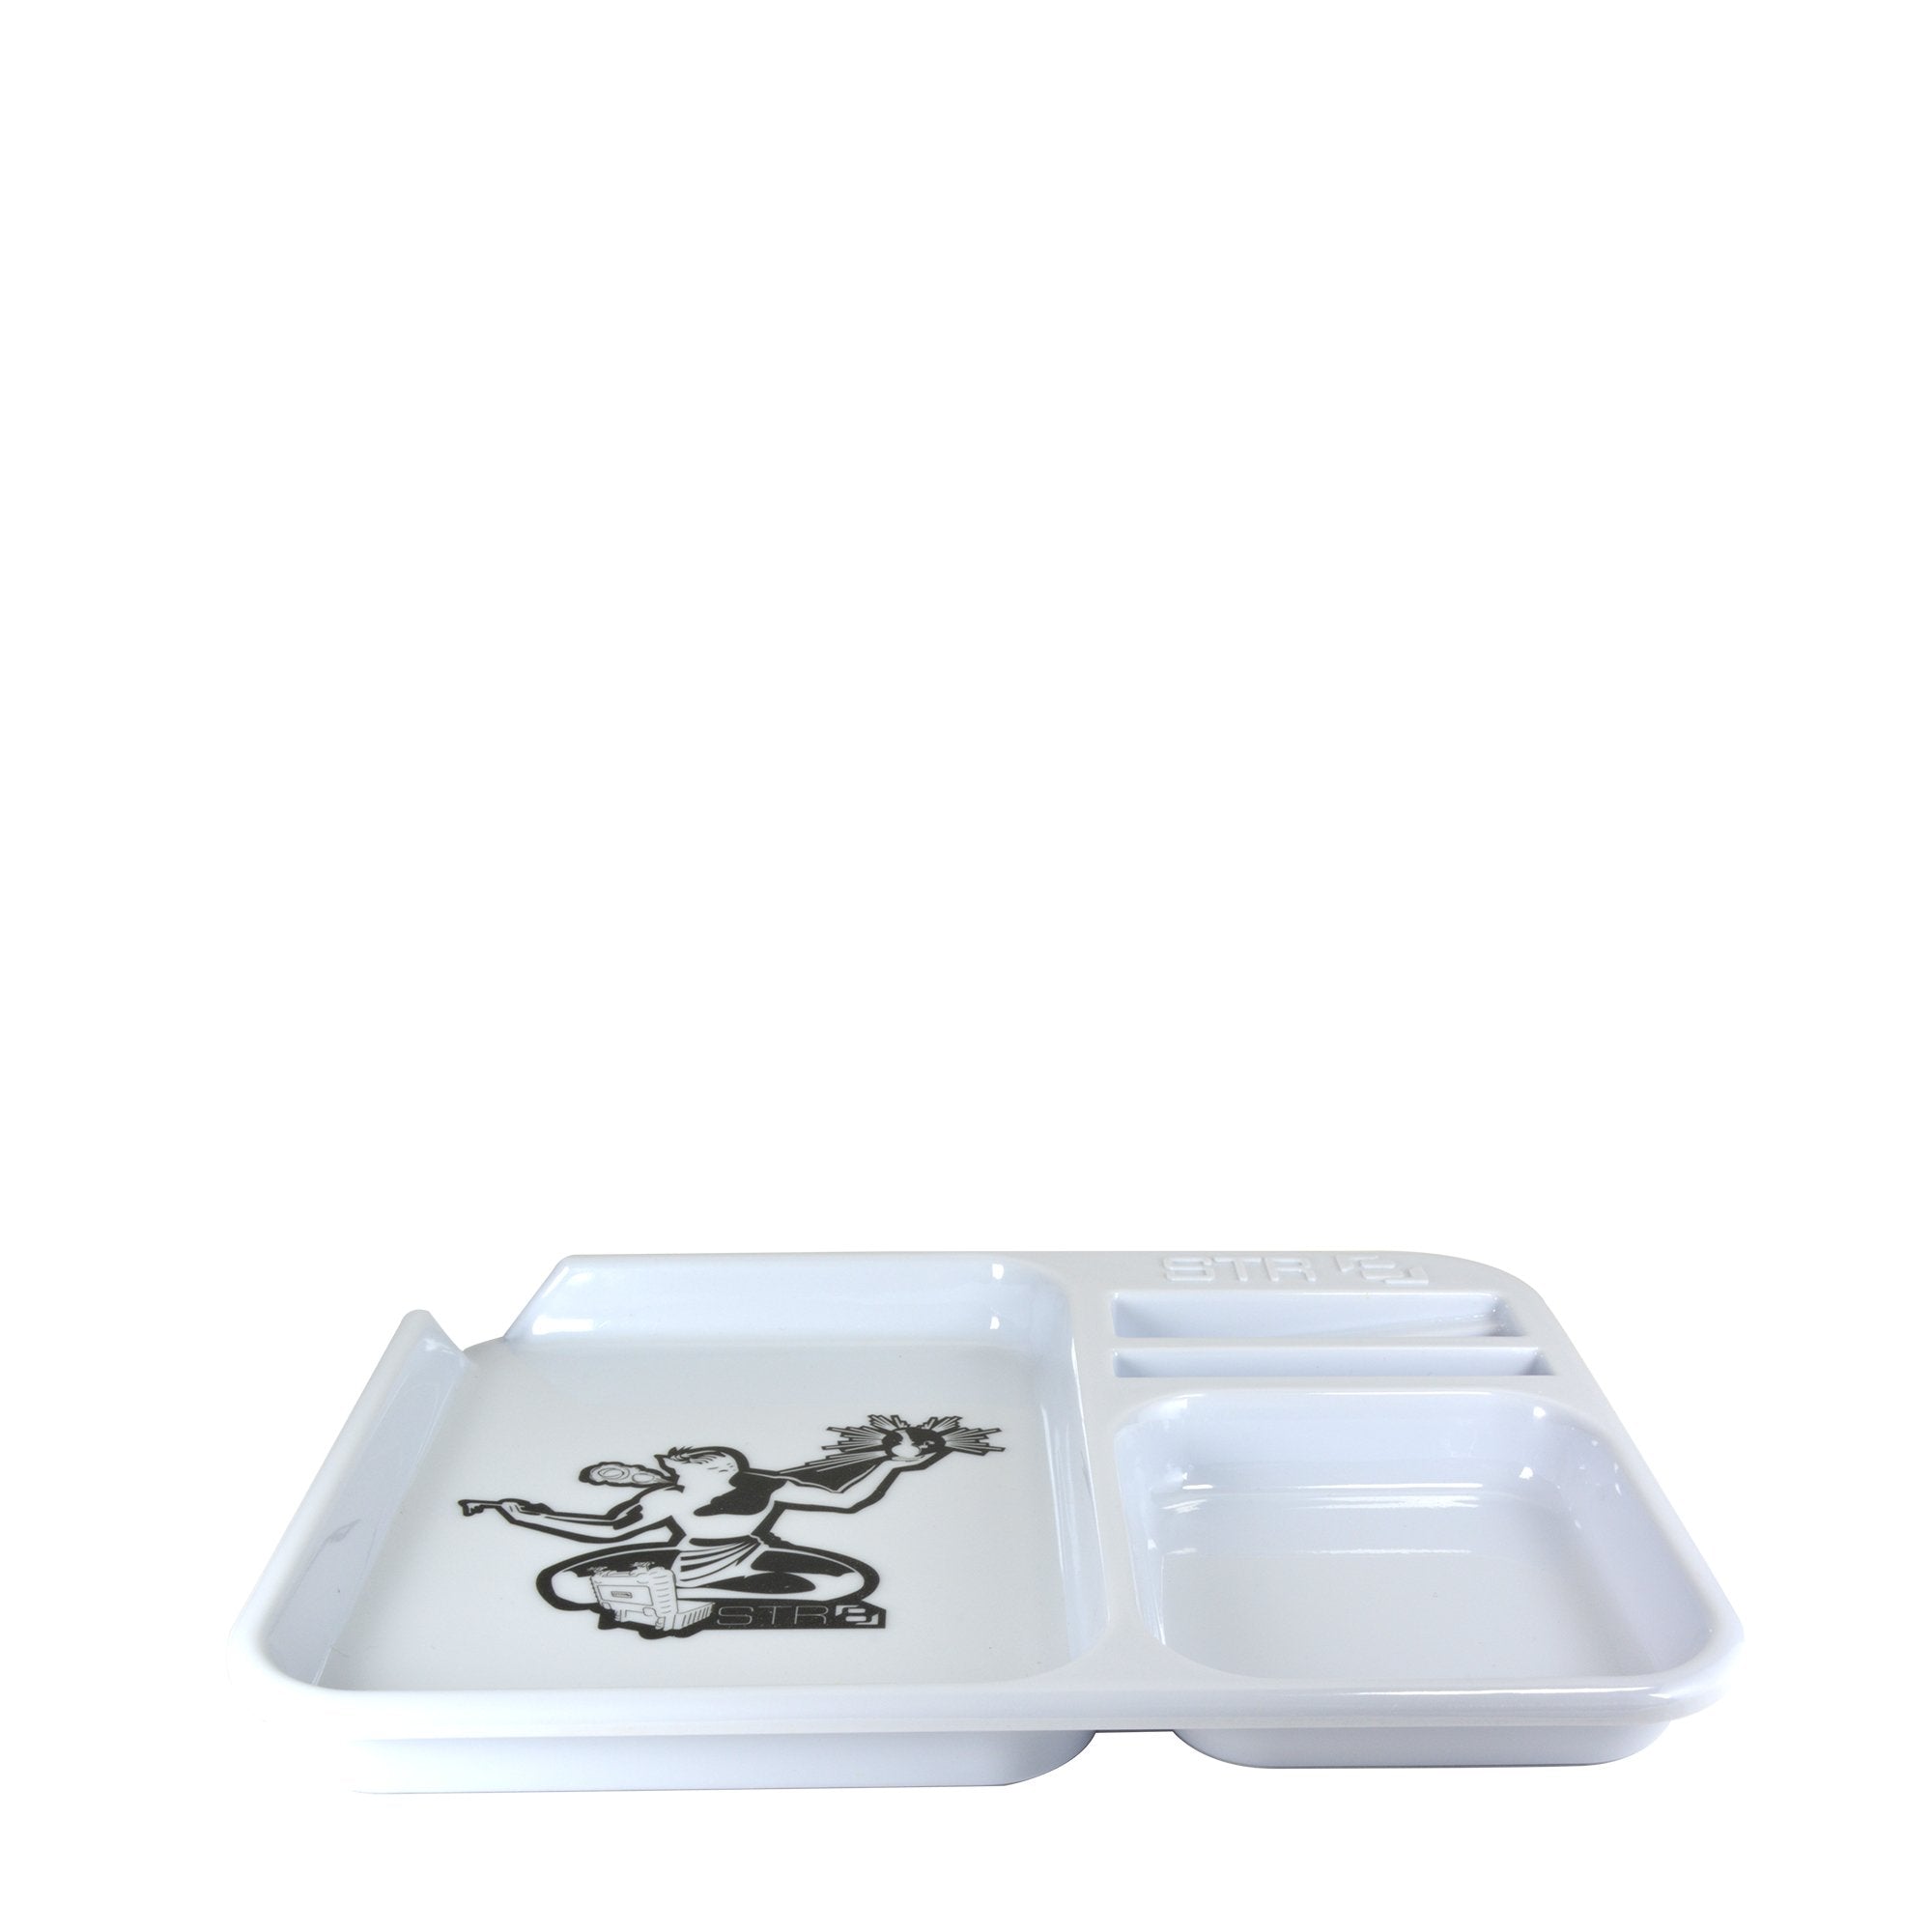 STR8 | Spirit of Detroit White Rolling Tray | 9in x 6.7in - Small - Plastic - 3